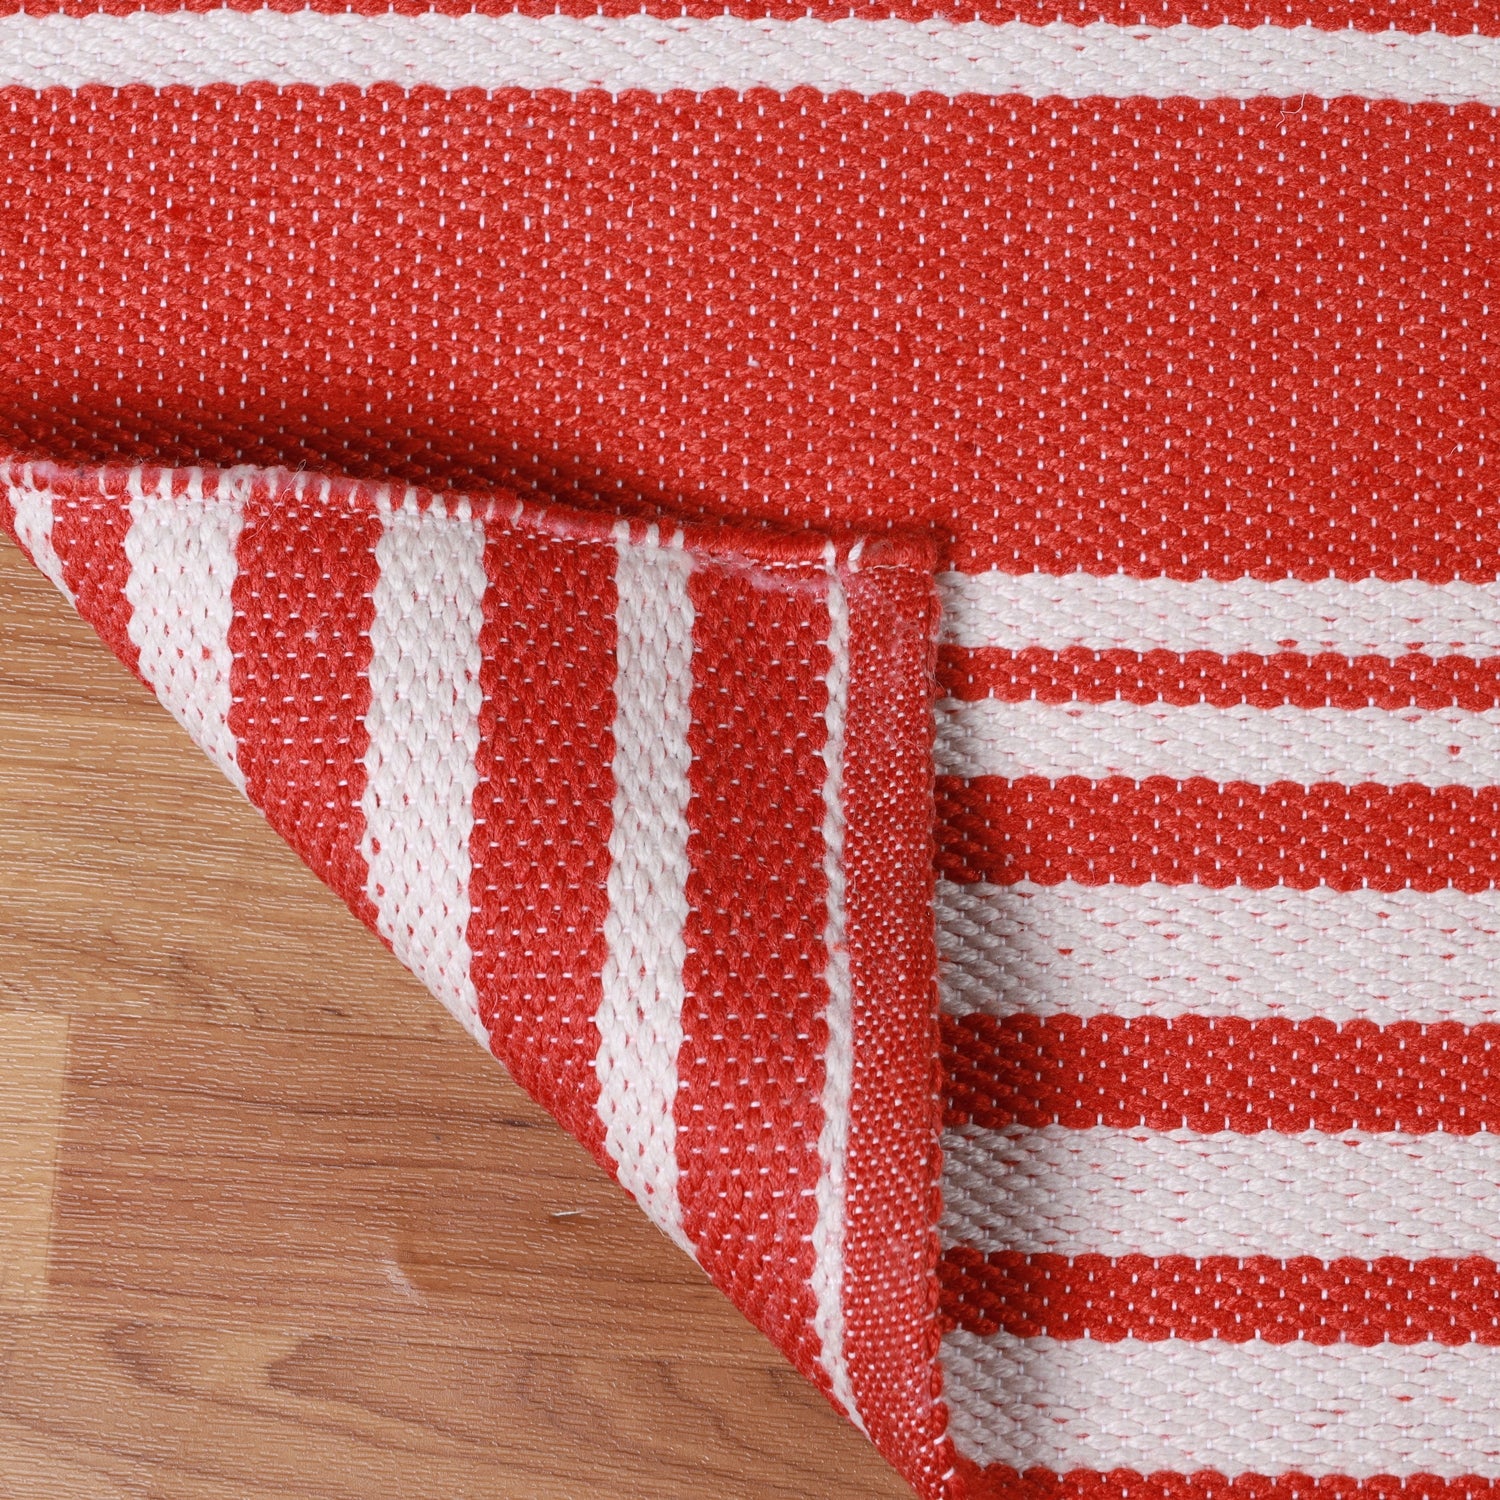  Superior Modern Stripes Large Indoor Outdoor Pattern Area Rug -  Red